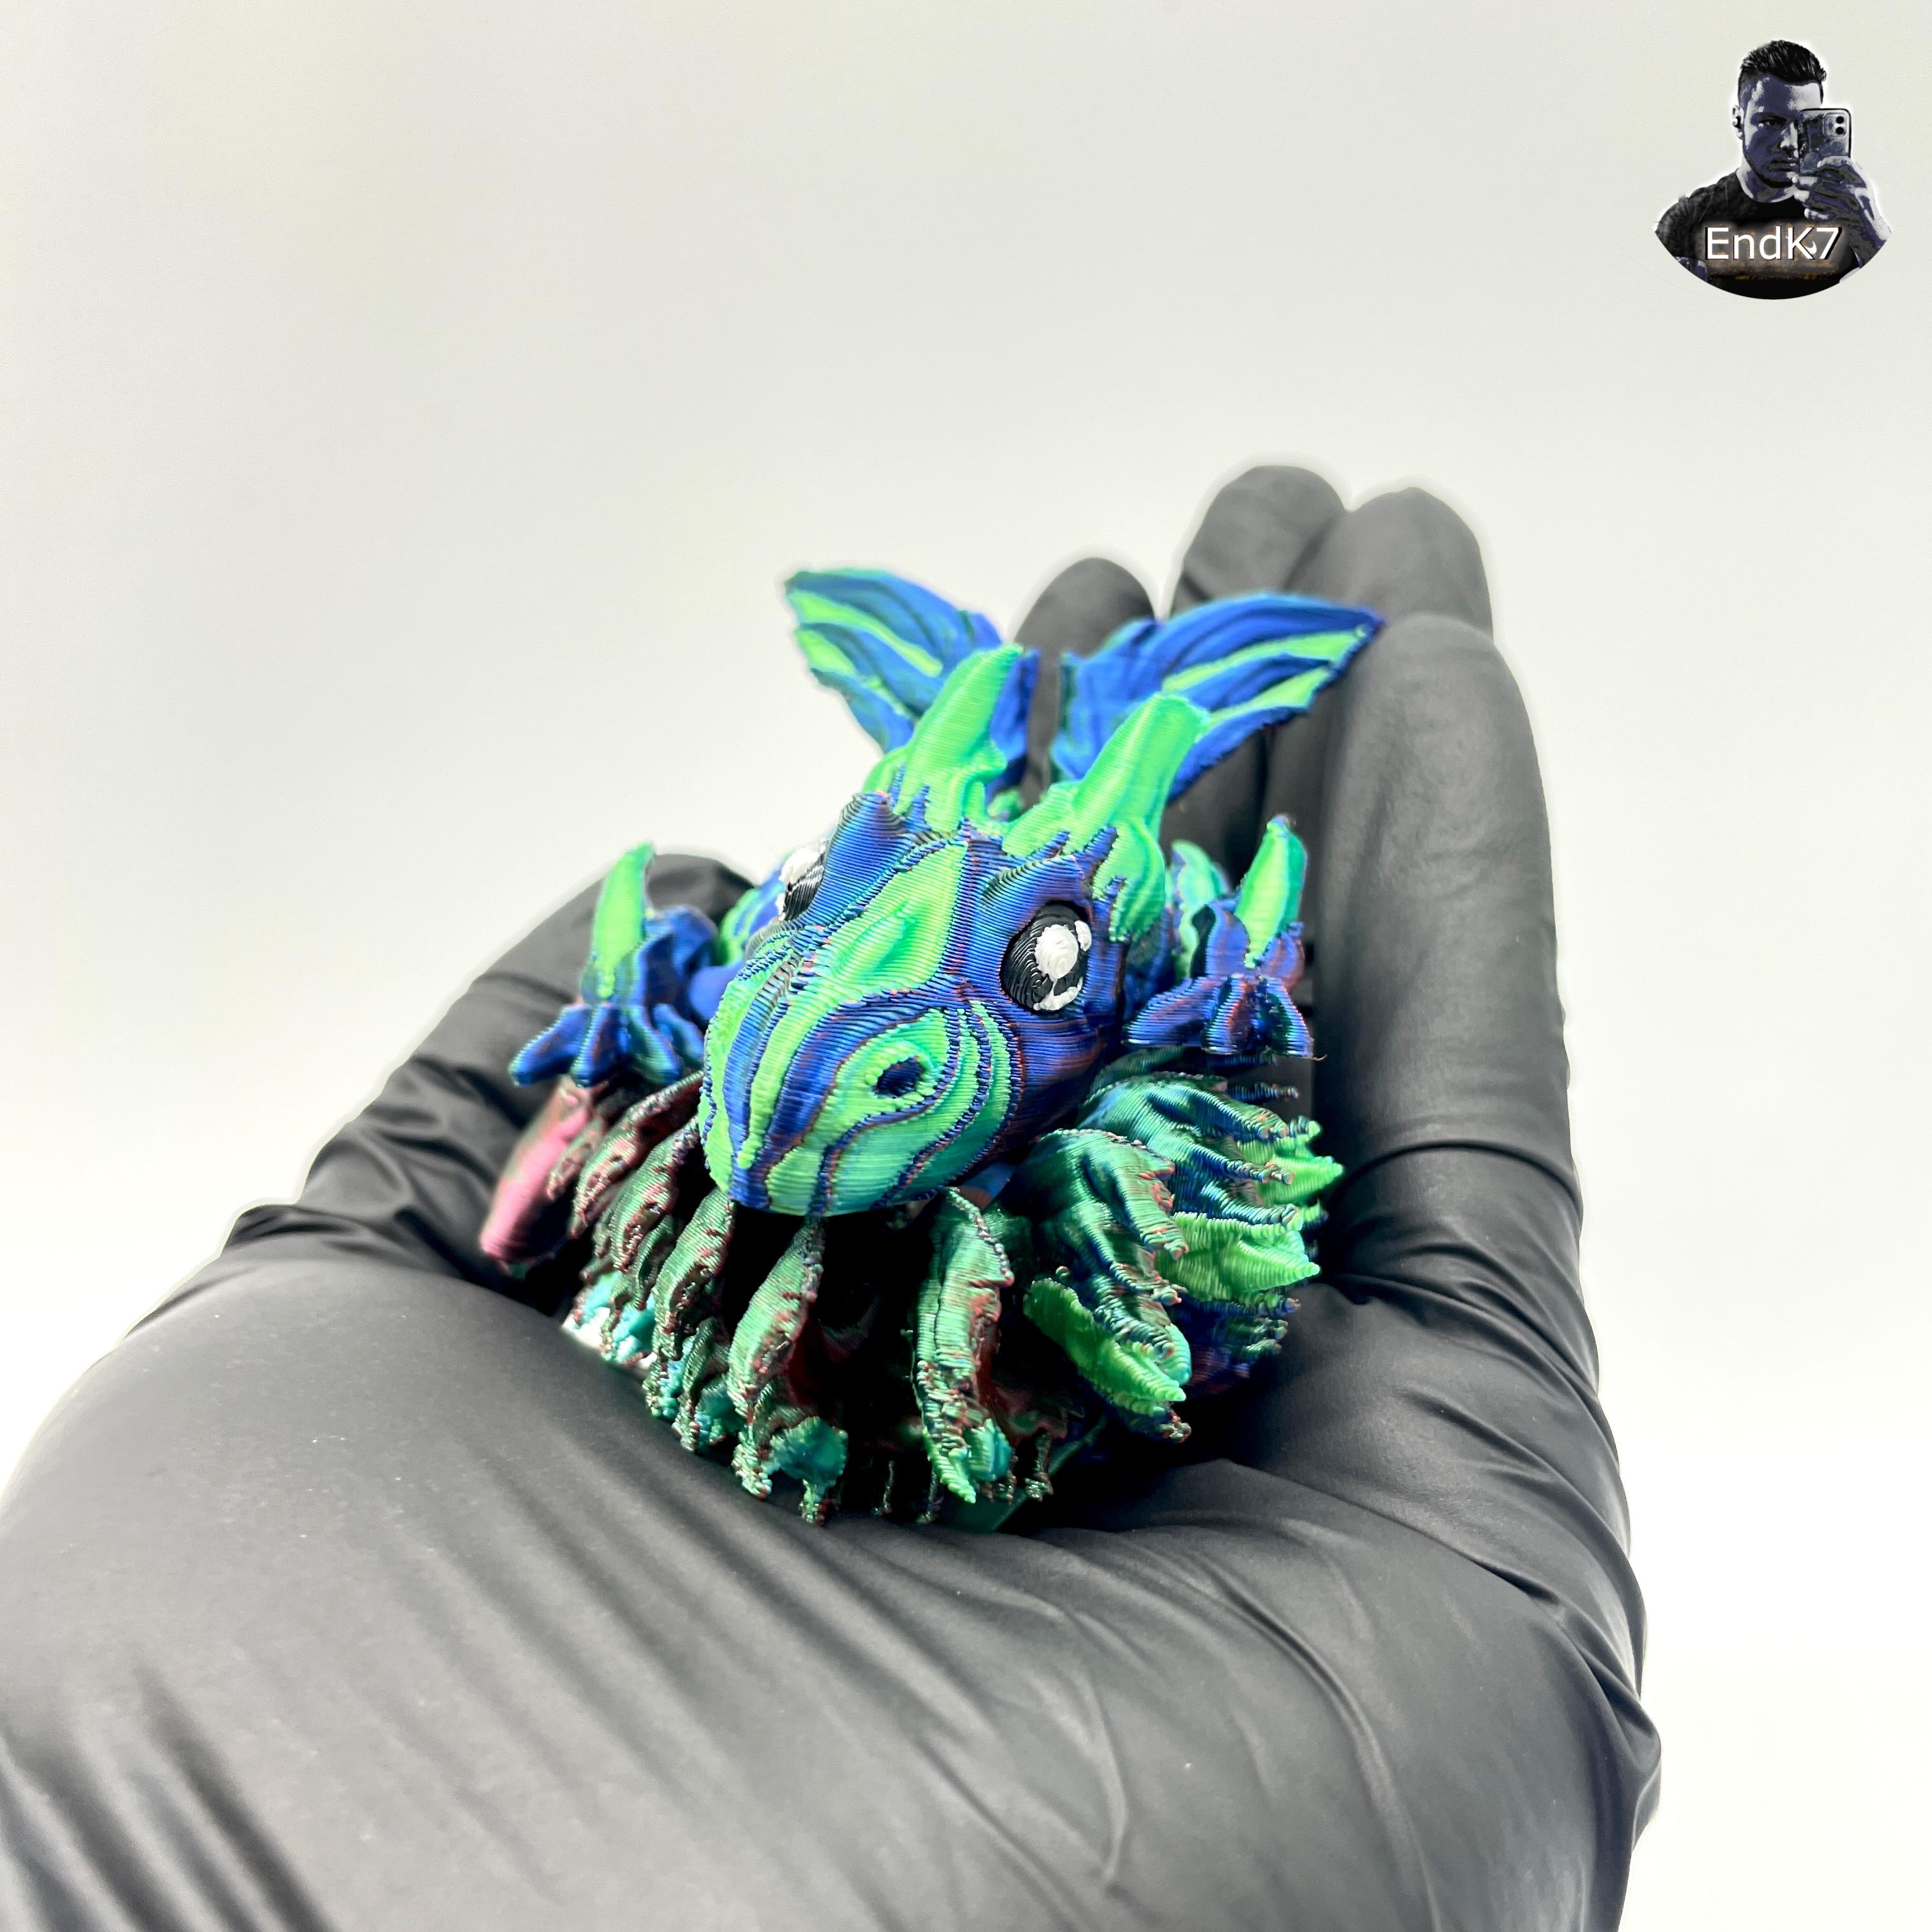 Majestic Baby Dragon 🐉 - Multicolor - Articulated - Print in Place - No Supports 3d model